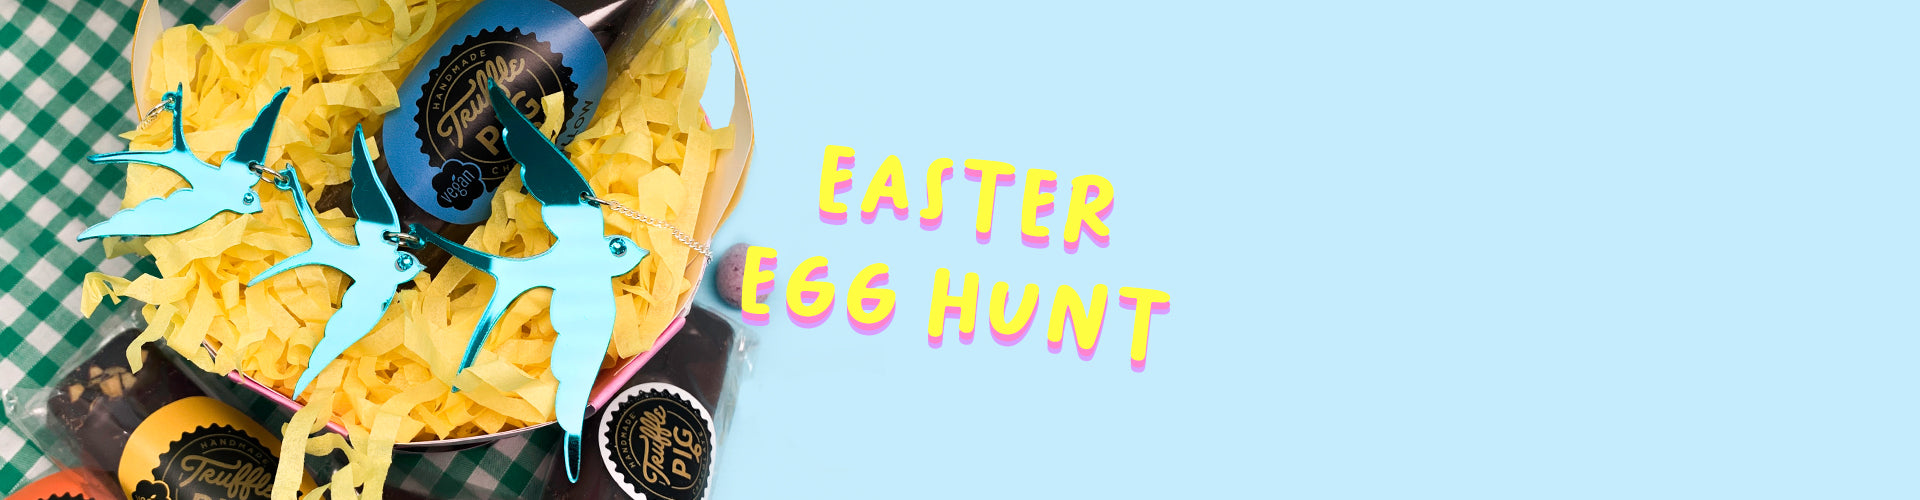 We're going on an egg hunt!